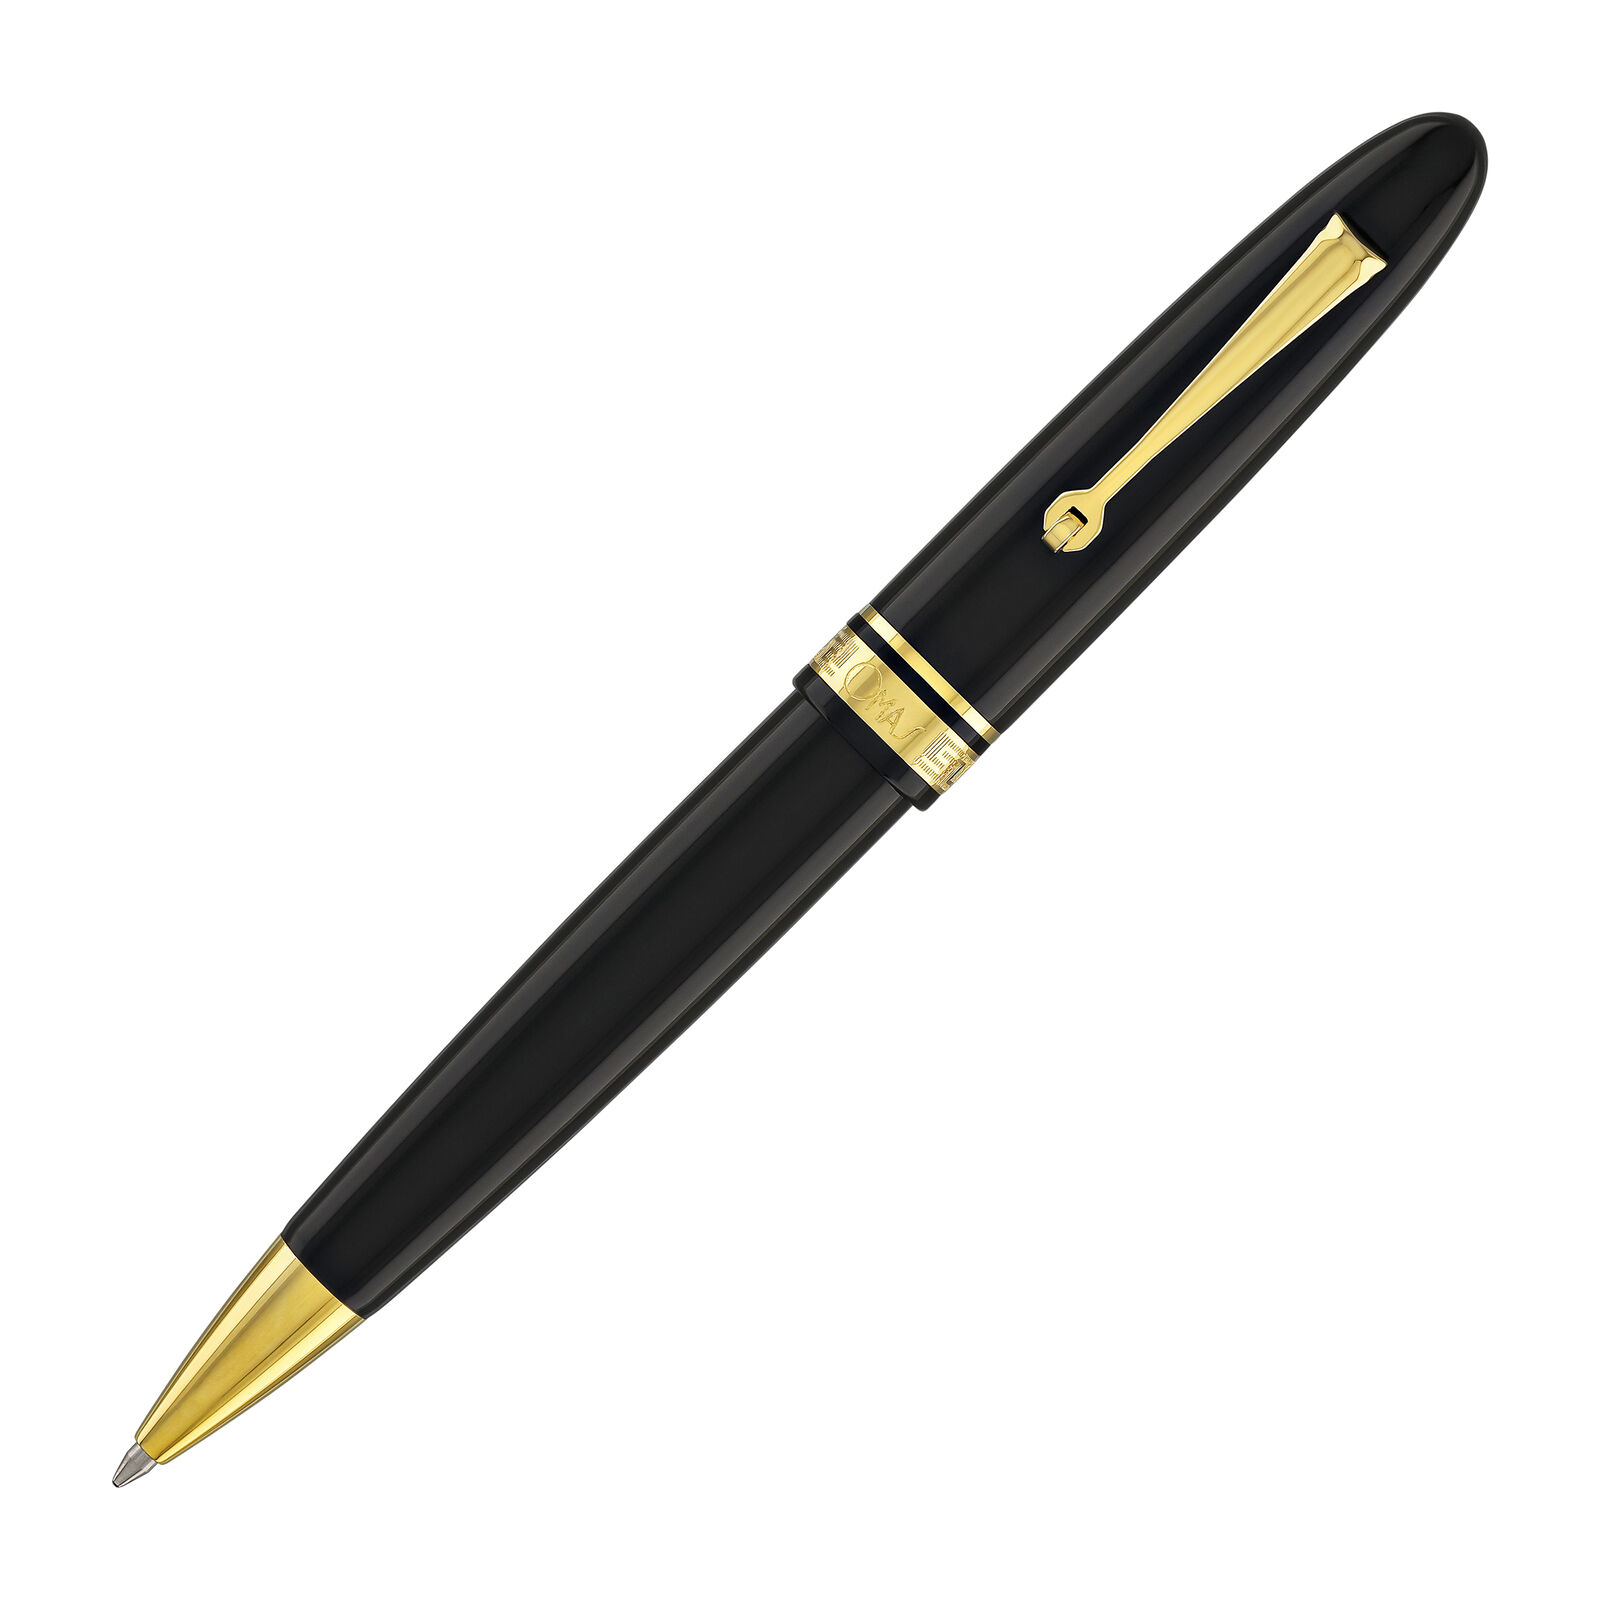 Omas Ogiva Ballpoint Pen in Nera with Gold Trim - NEW in Box